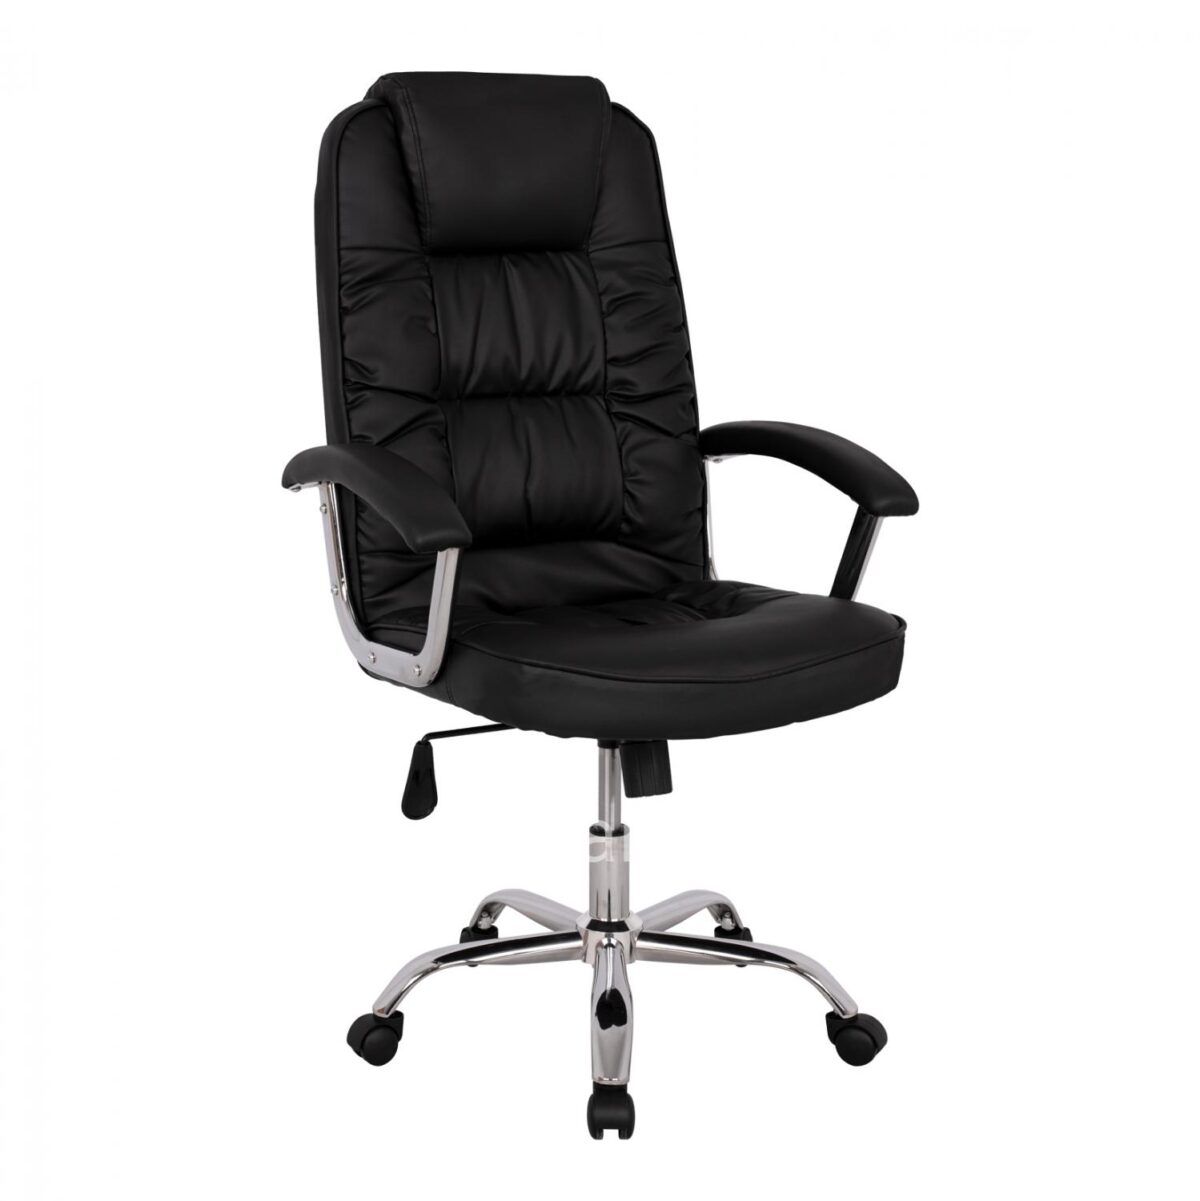 Office chair HM1112 with black PU and chromed base 63x67x113 cm.